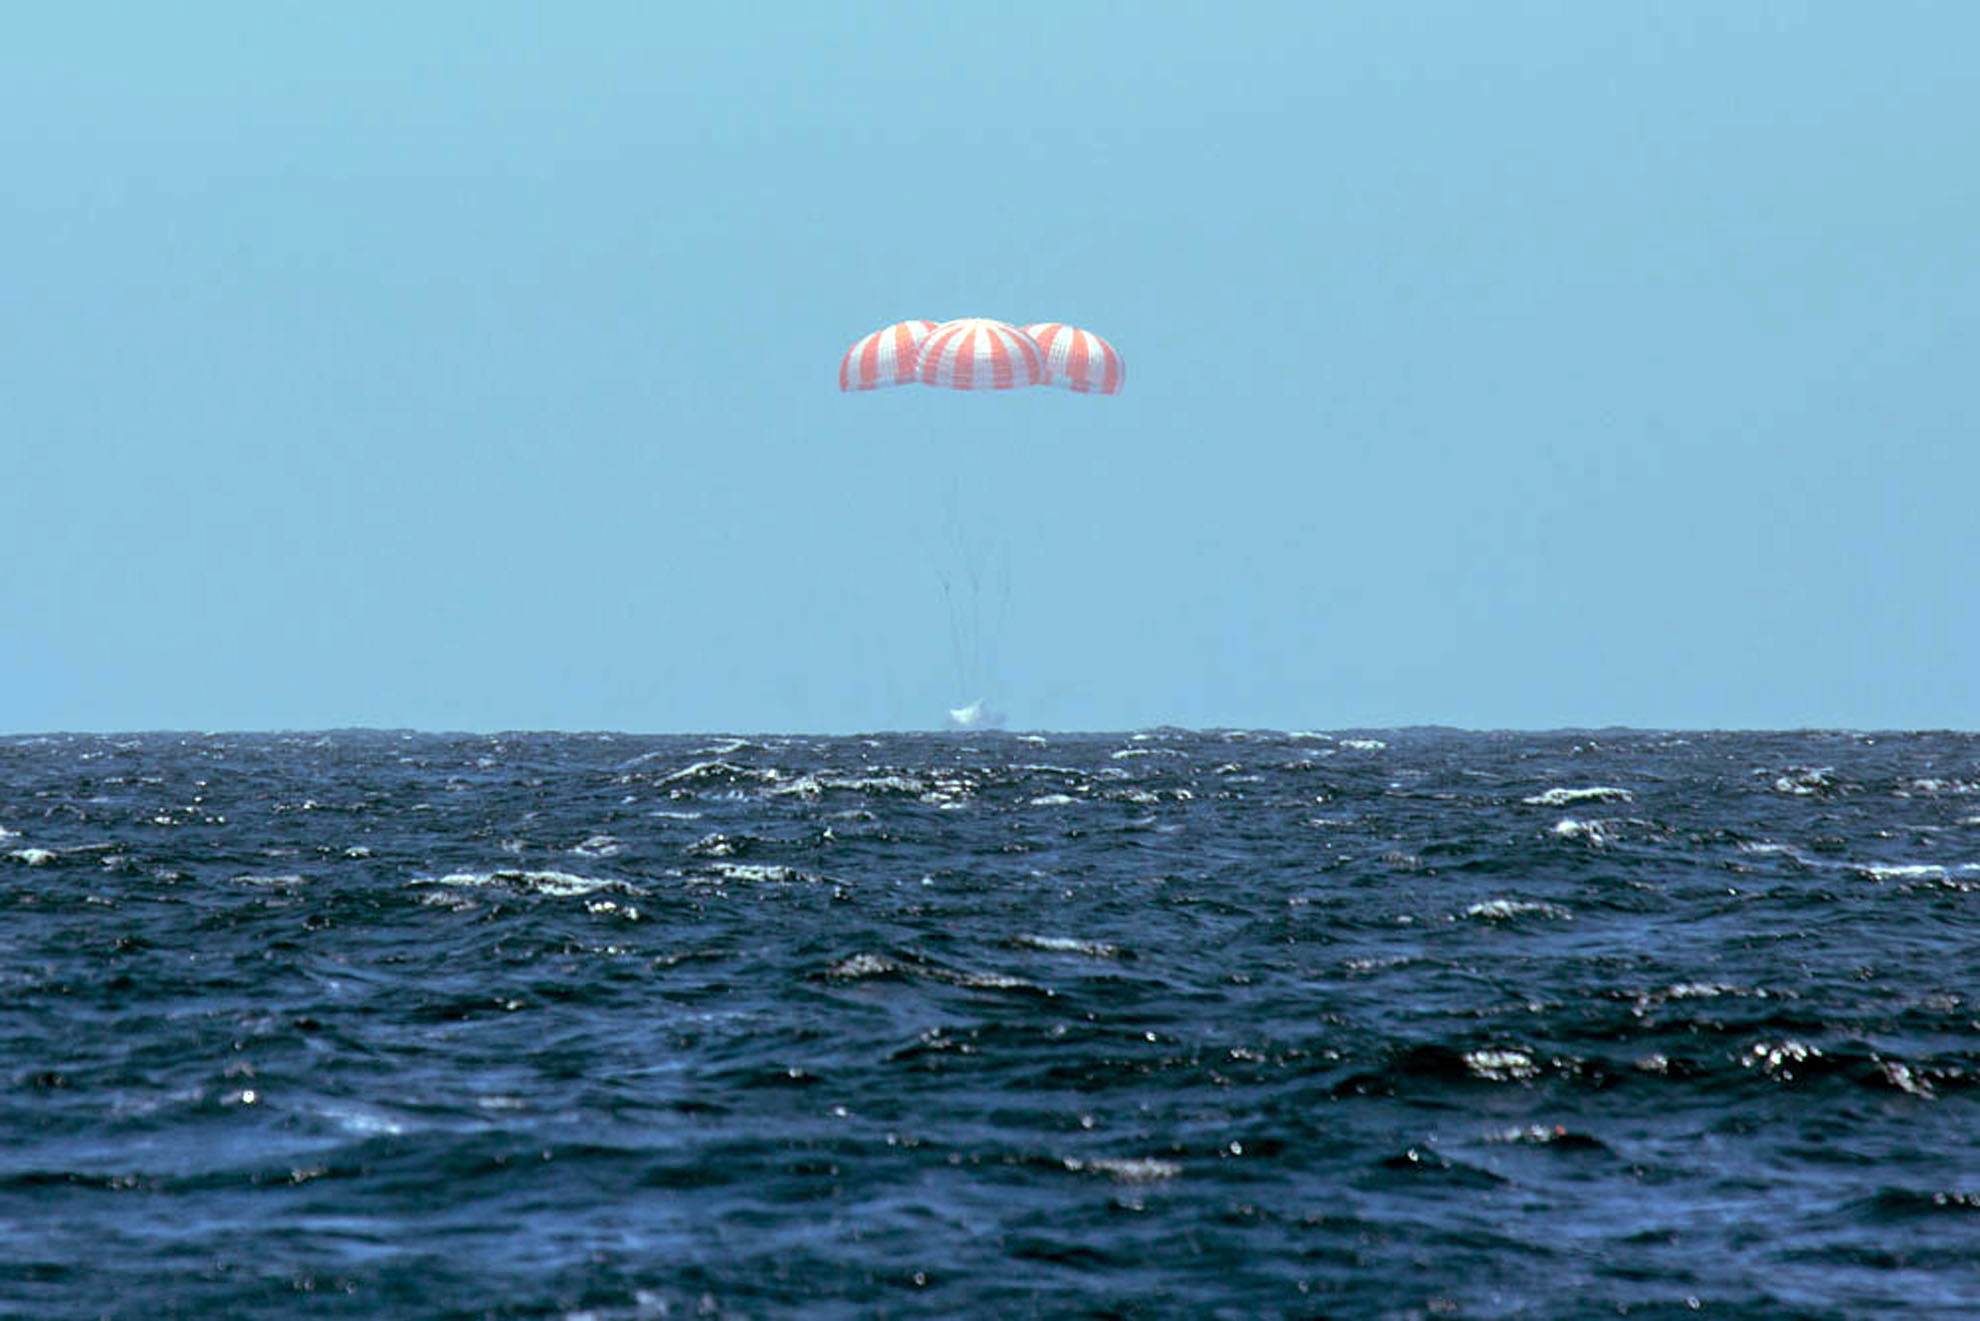 SpaceX's Dragon spacecraft splashes down after it successfully completed the CRS 3 mission for NASA, landing safely Sunday in the Pacific Ocean with 3,500 pounds of ISS cargo.